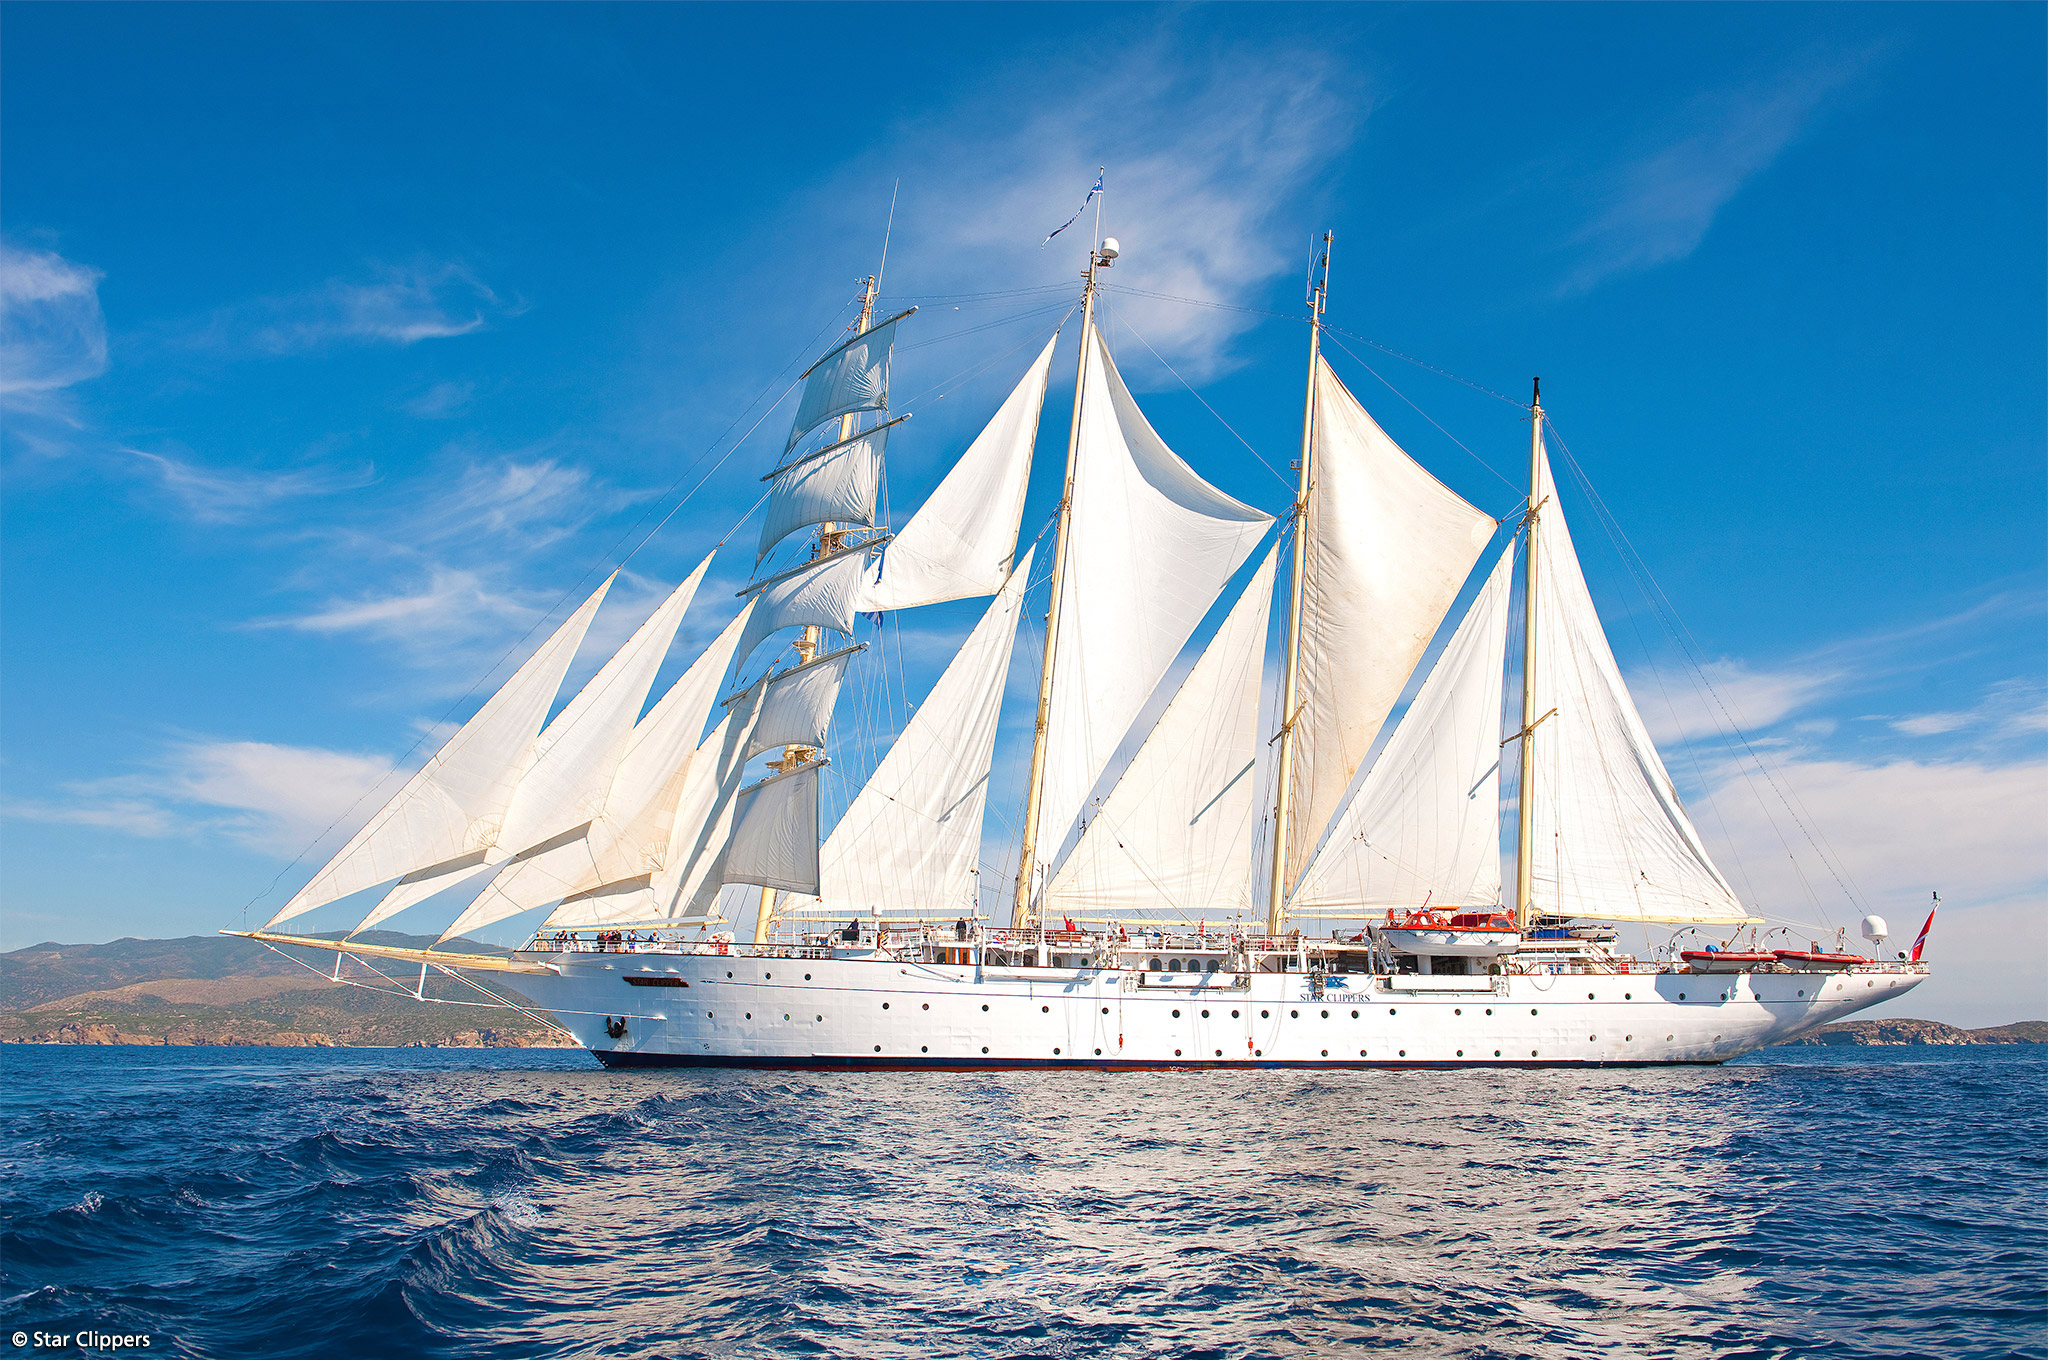 star clippers cruises official website